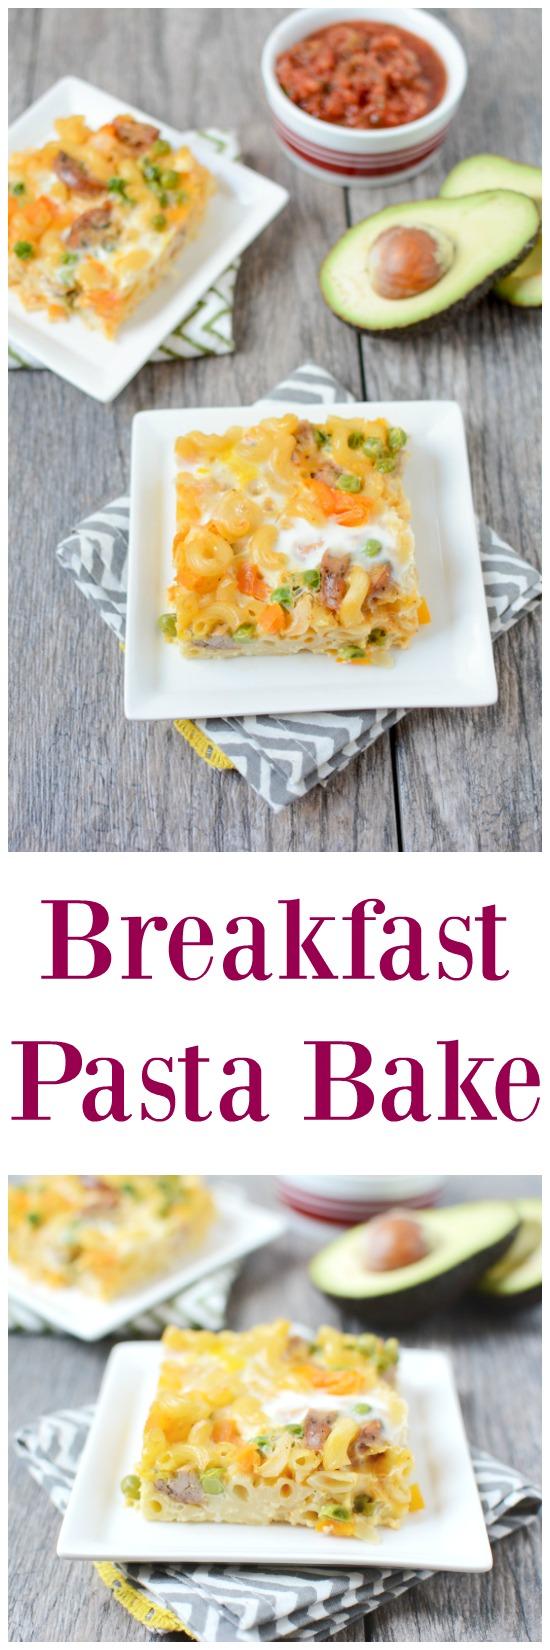 Packed with protein, vegetables and whole grains, this Breakfast Pasta Bake is easy to make. Assemble ahead of time and bake it in the morning to feed guests or bake it on Sunday and reheat it for breakfast all week long.